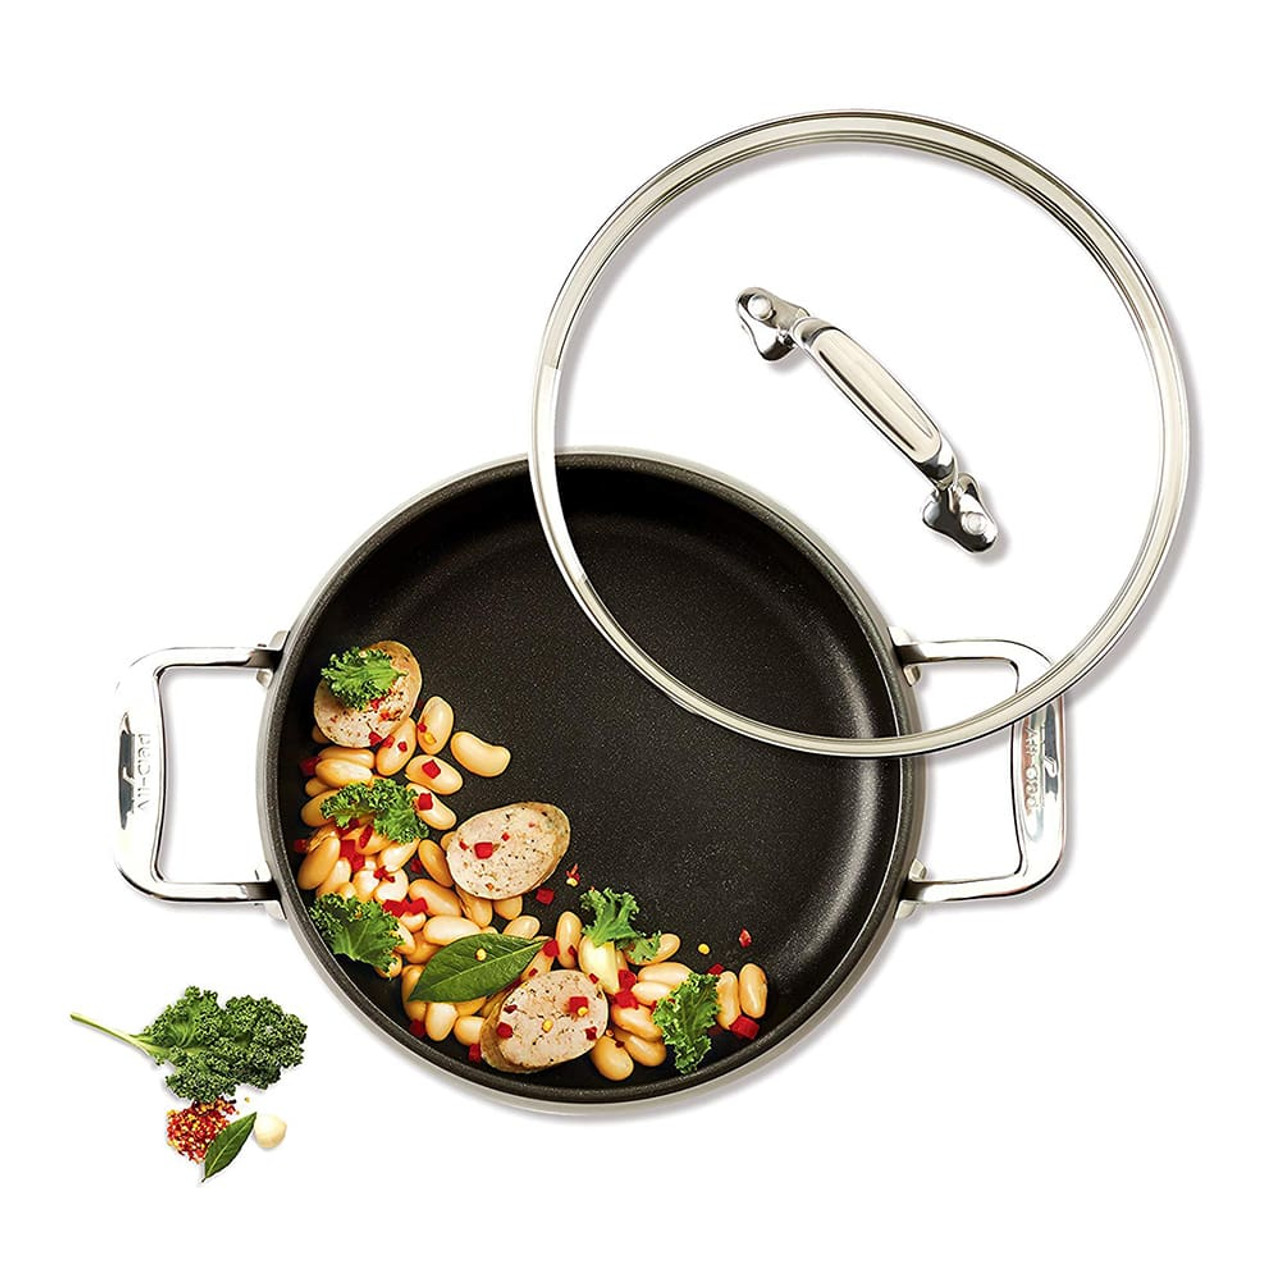 All-Clad HA1 Nonstick Covered Stockpot